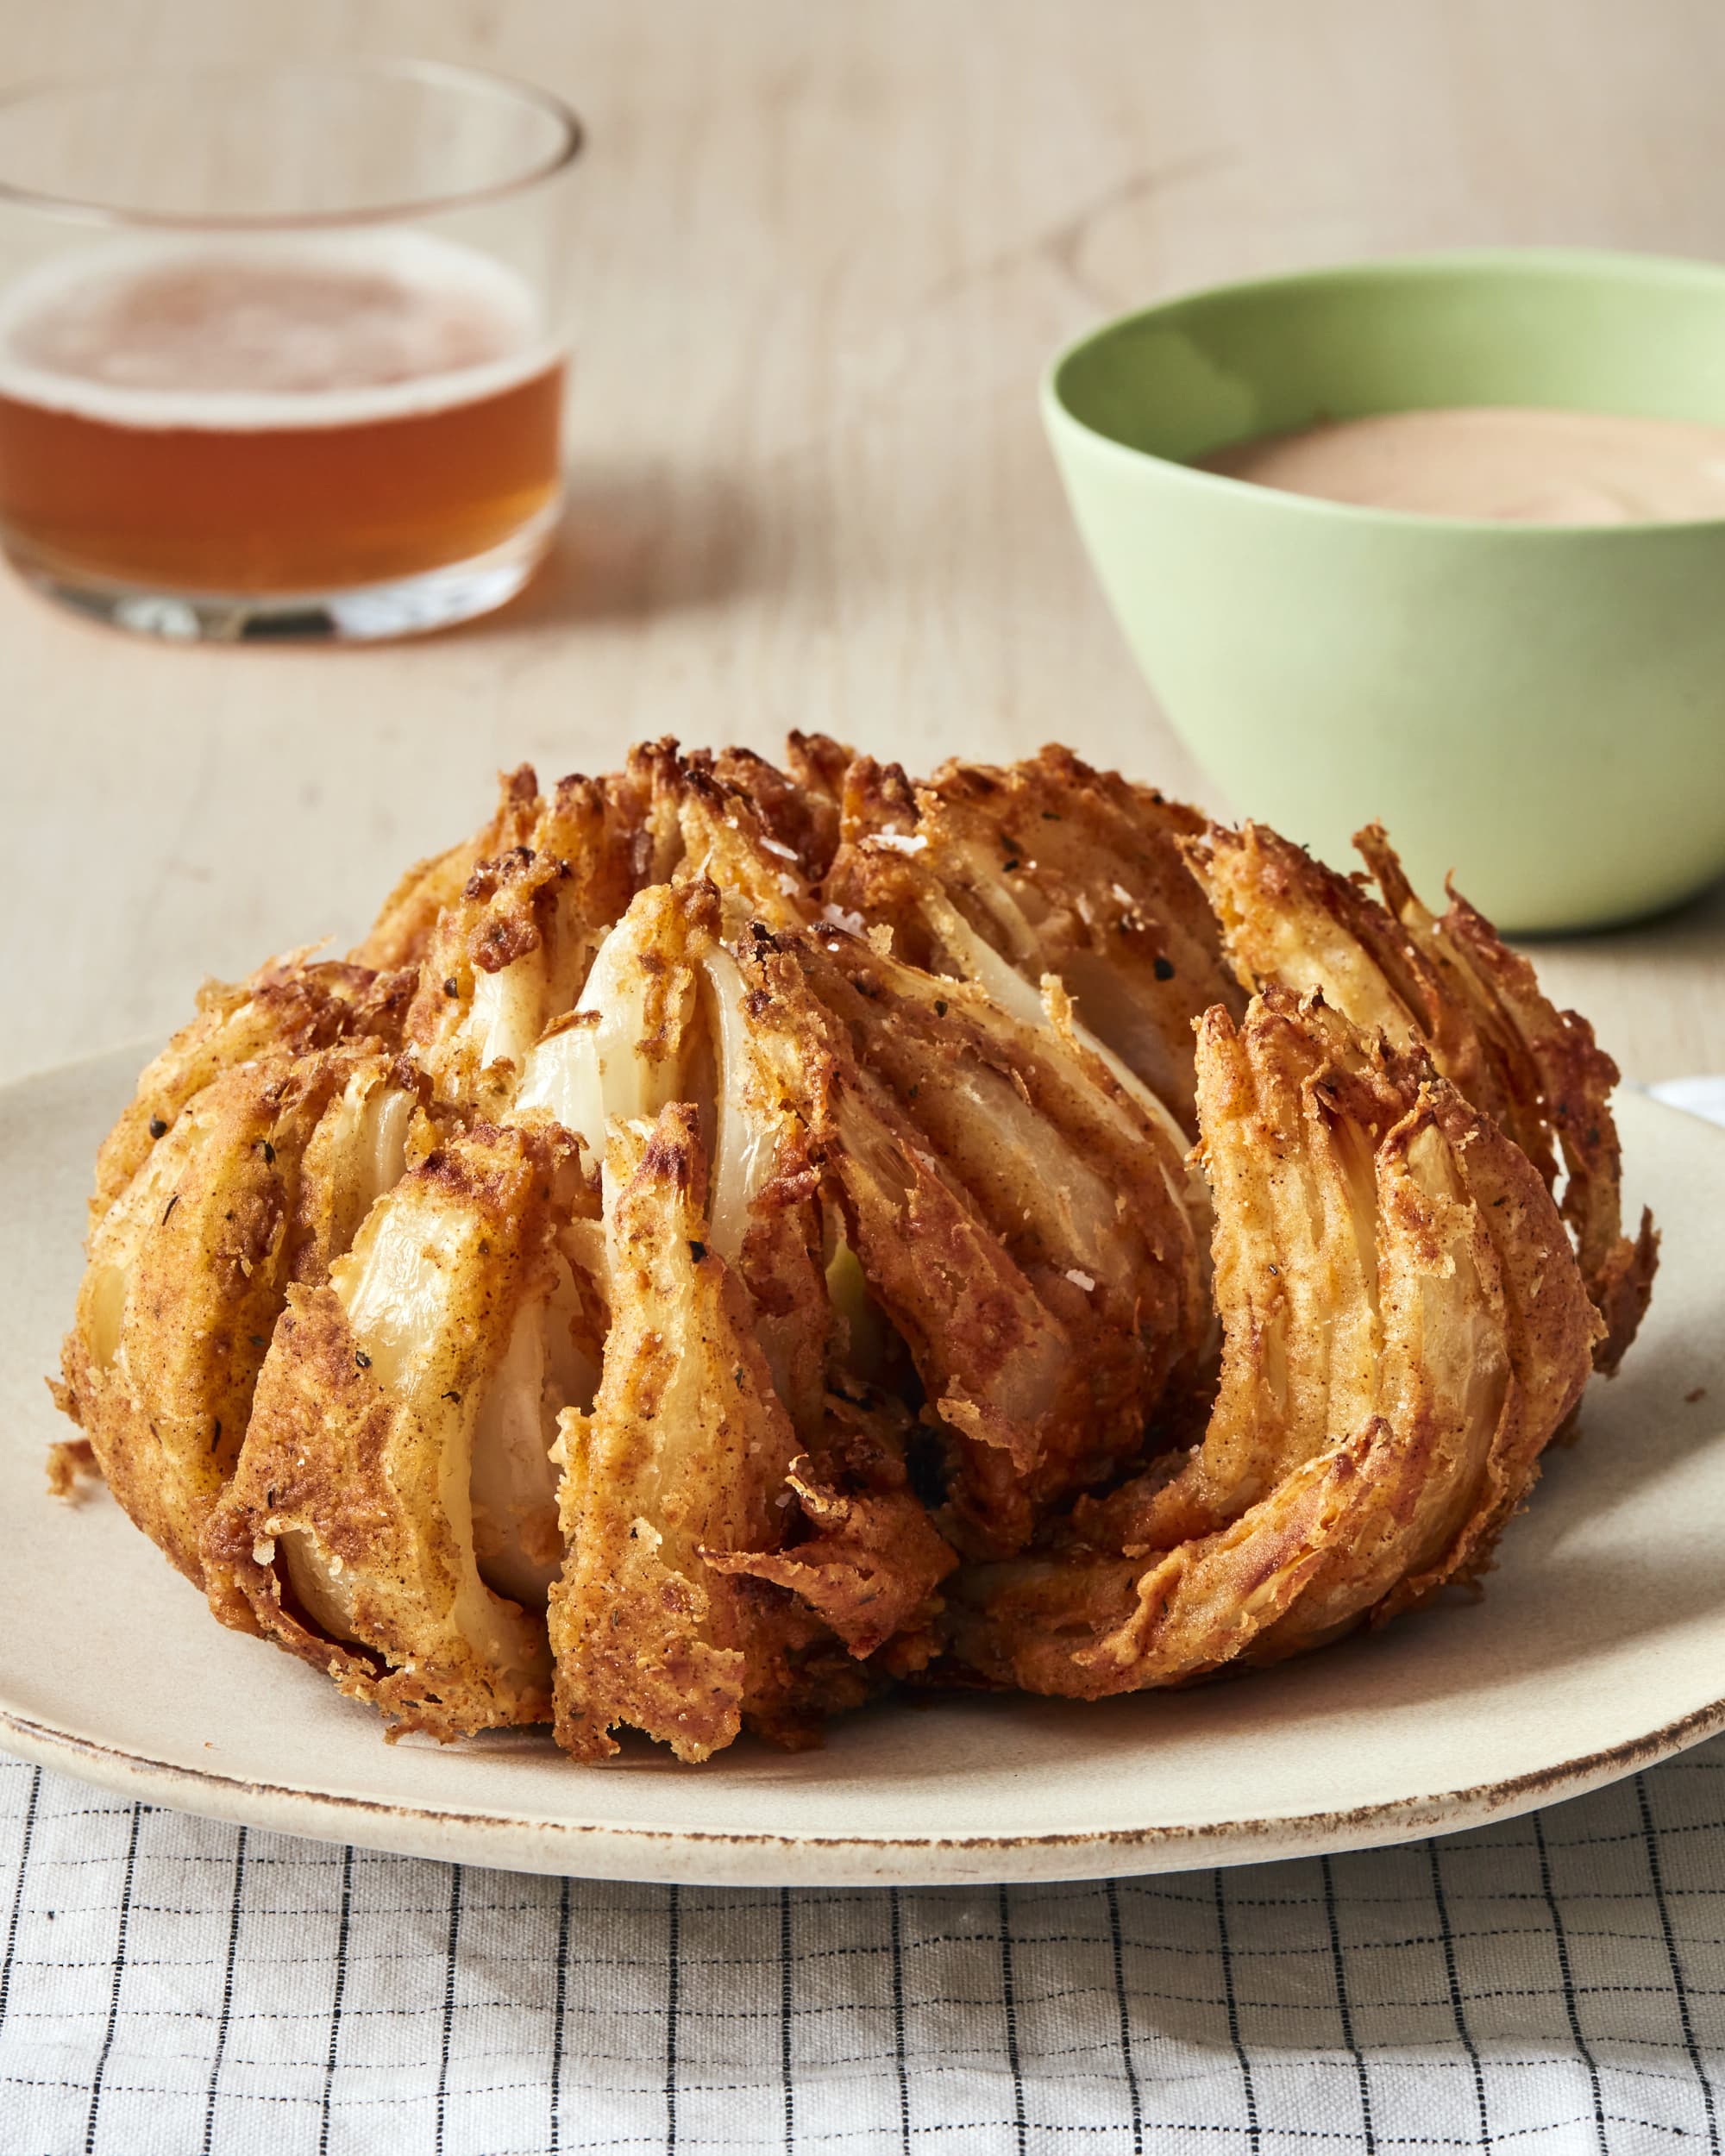 https://cdn.apartmenttherapy.info/image/upload/v1639494887/k/Photo/Recipes/2021-12-blooming-onion/211208_ApartmentTherapy_BloominOnion_0230.jpg